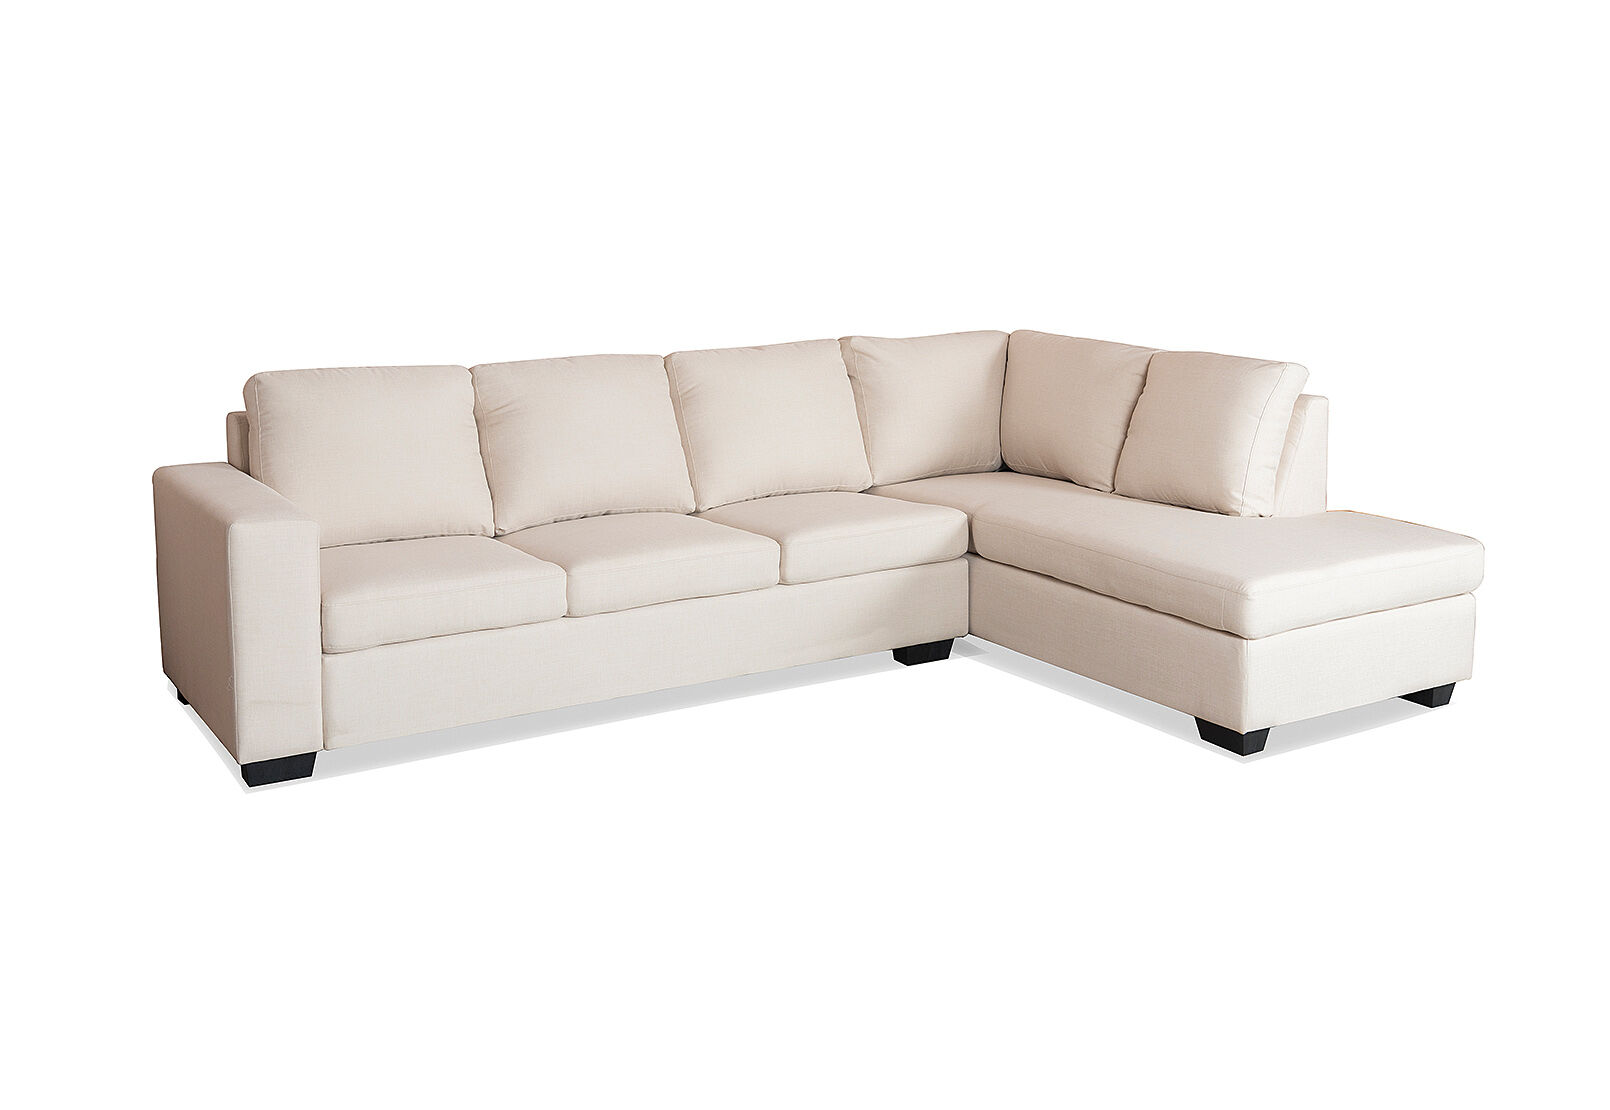 NATURAL BONZA Fabric Corner Lounge with RHF Chaise